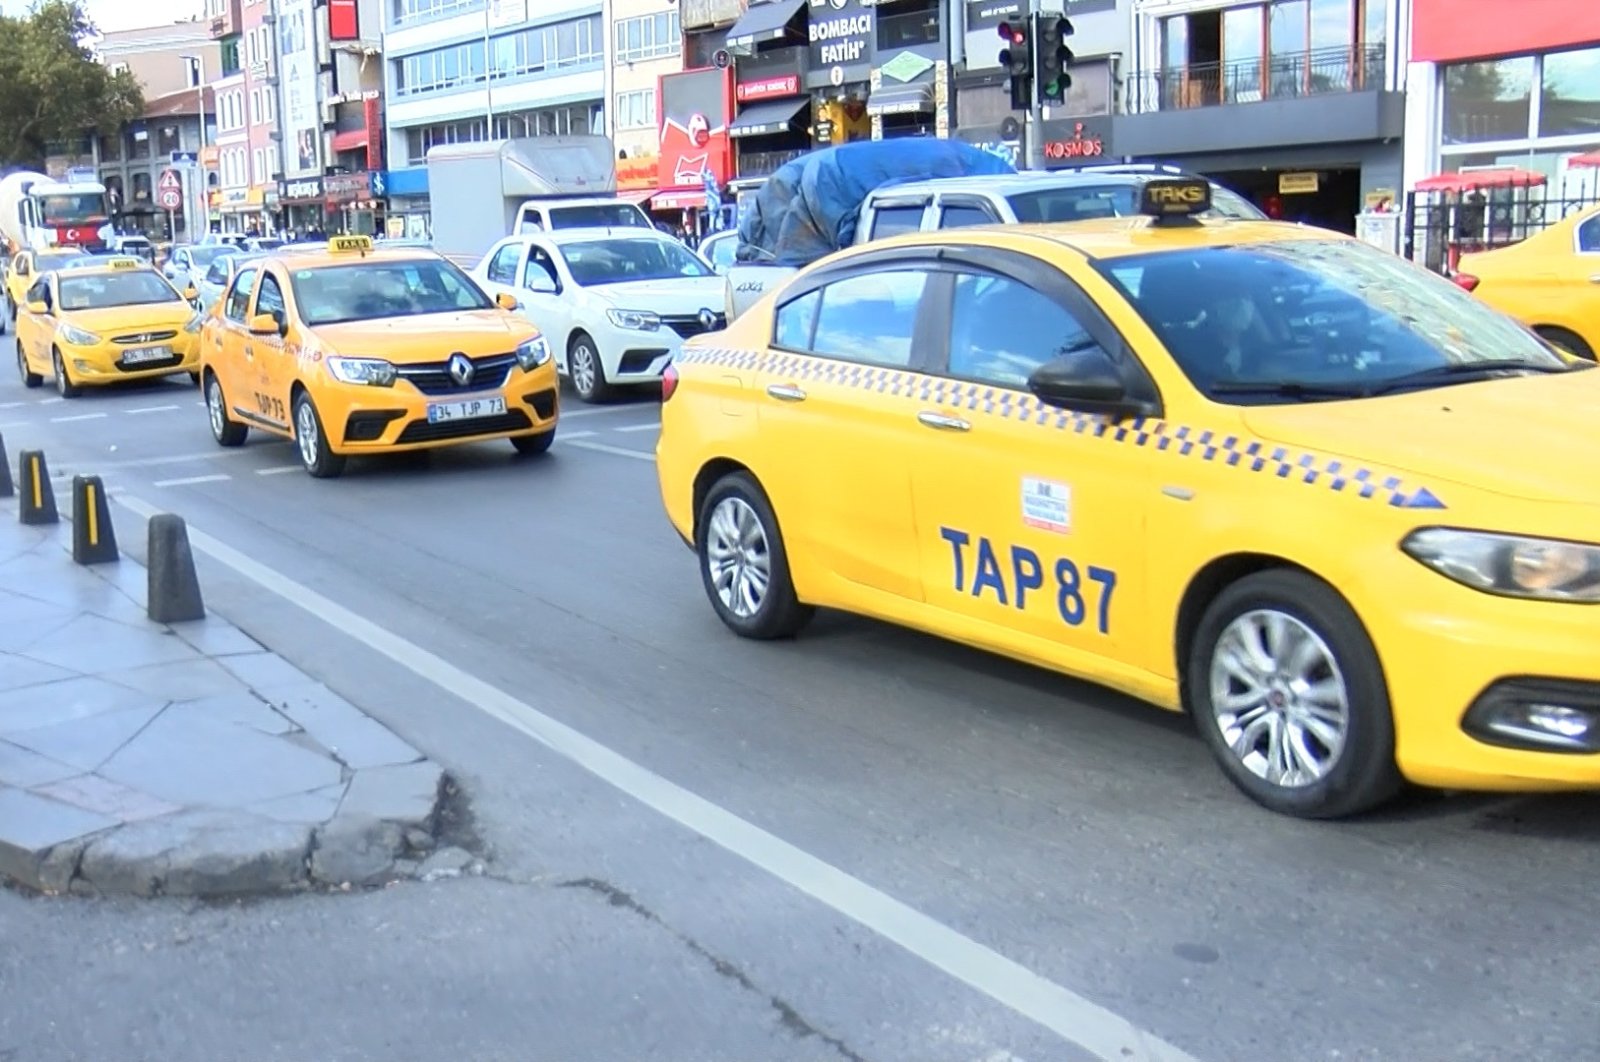 Taxis on a street in Istanbul, Turkey, Oct. 25, 2021. (DHA Photo)